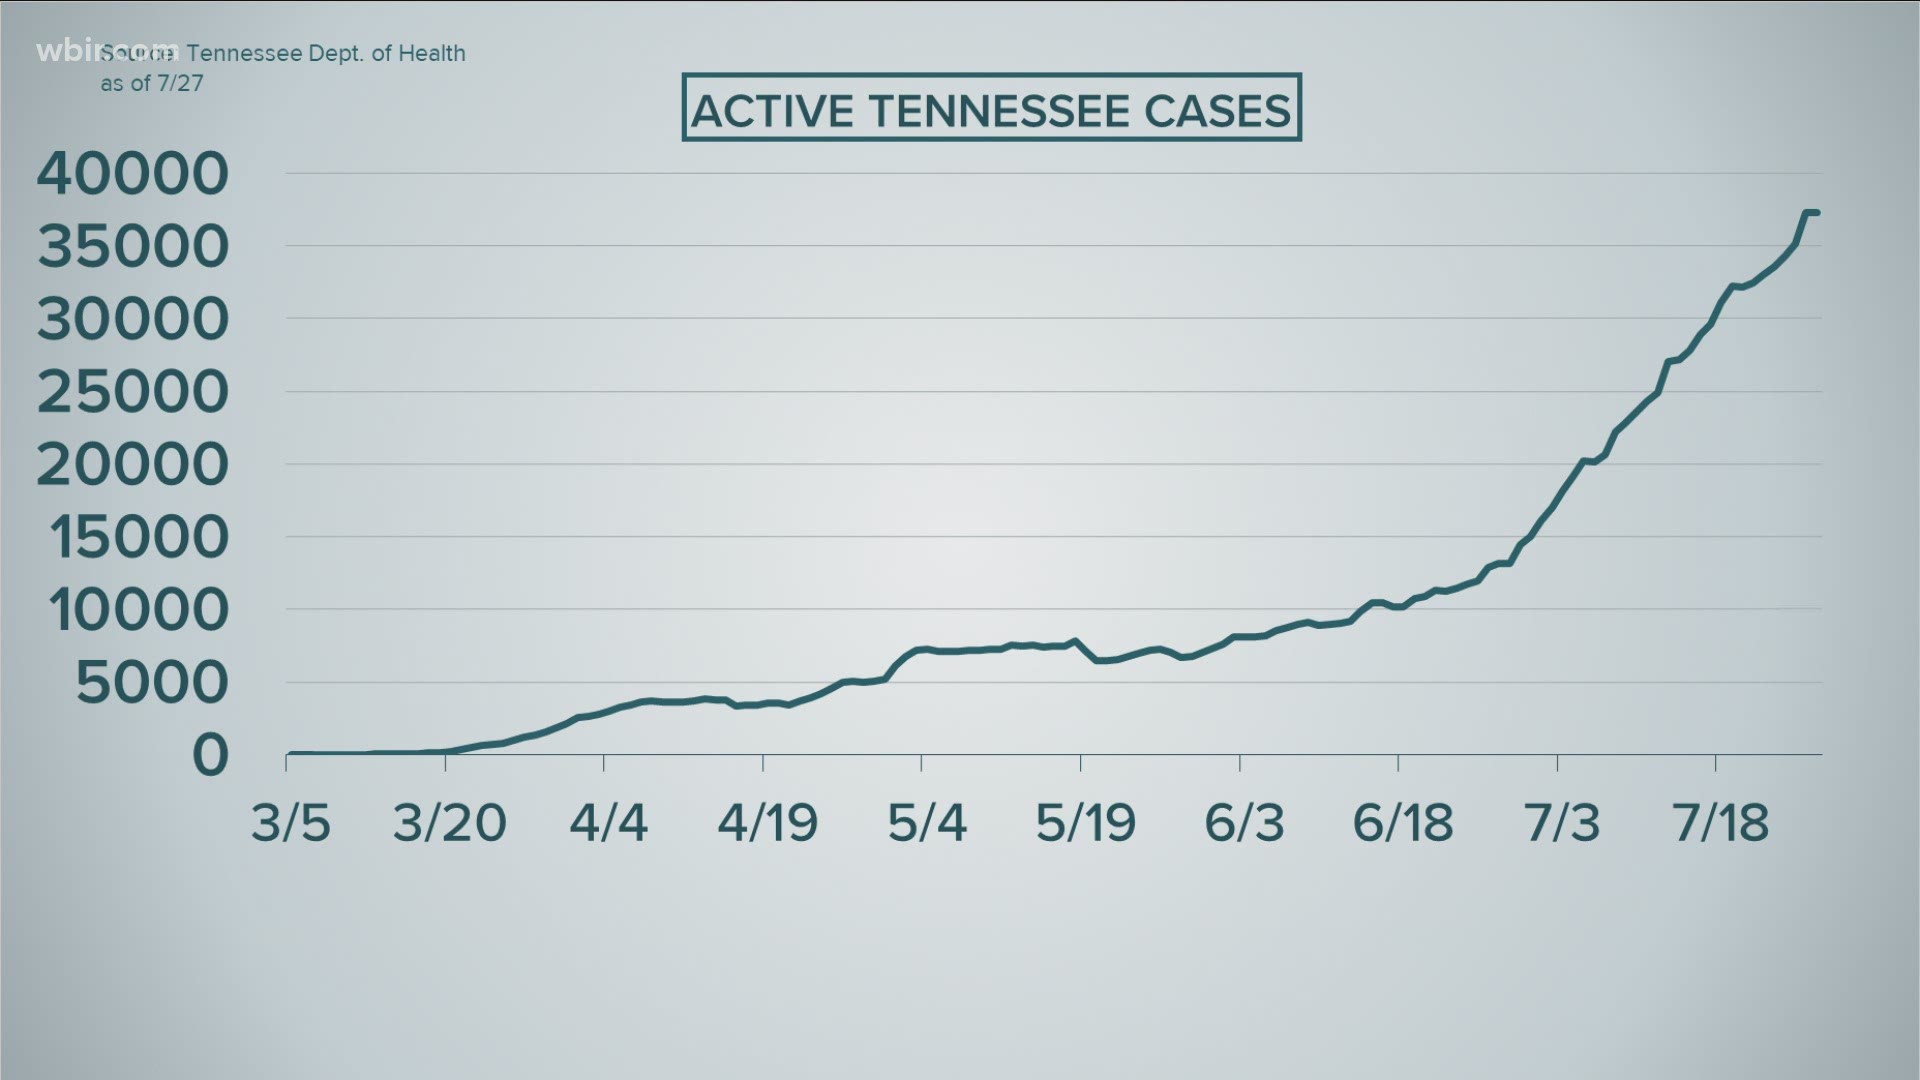 Tennessee is reporting more than 2,400 new, confirmed COVID-19 cases on July 27, bringing the total to more than 95,000 statewide.